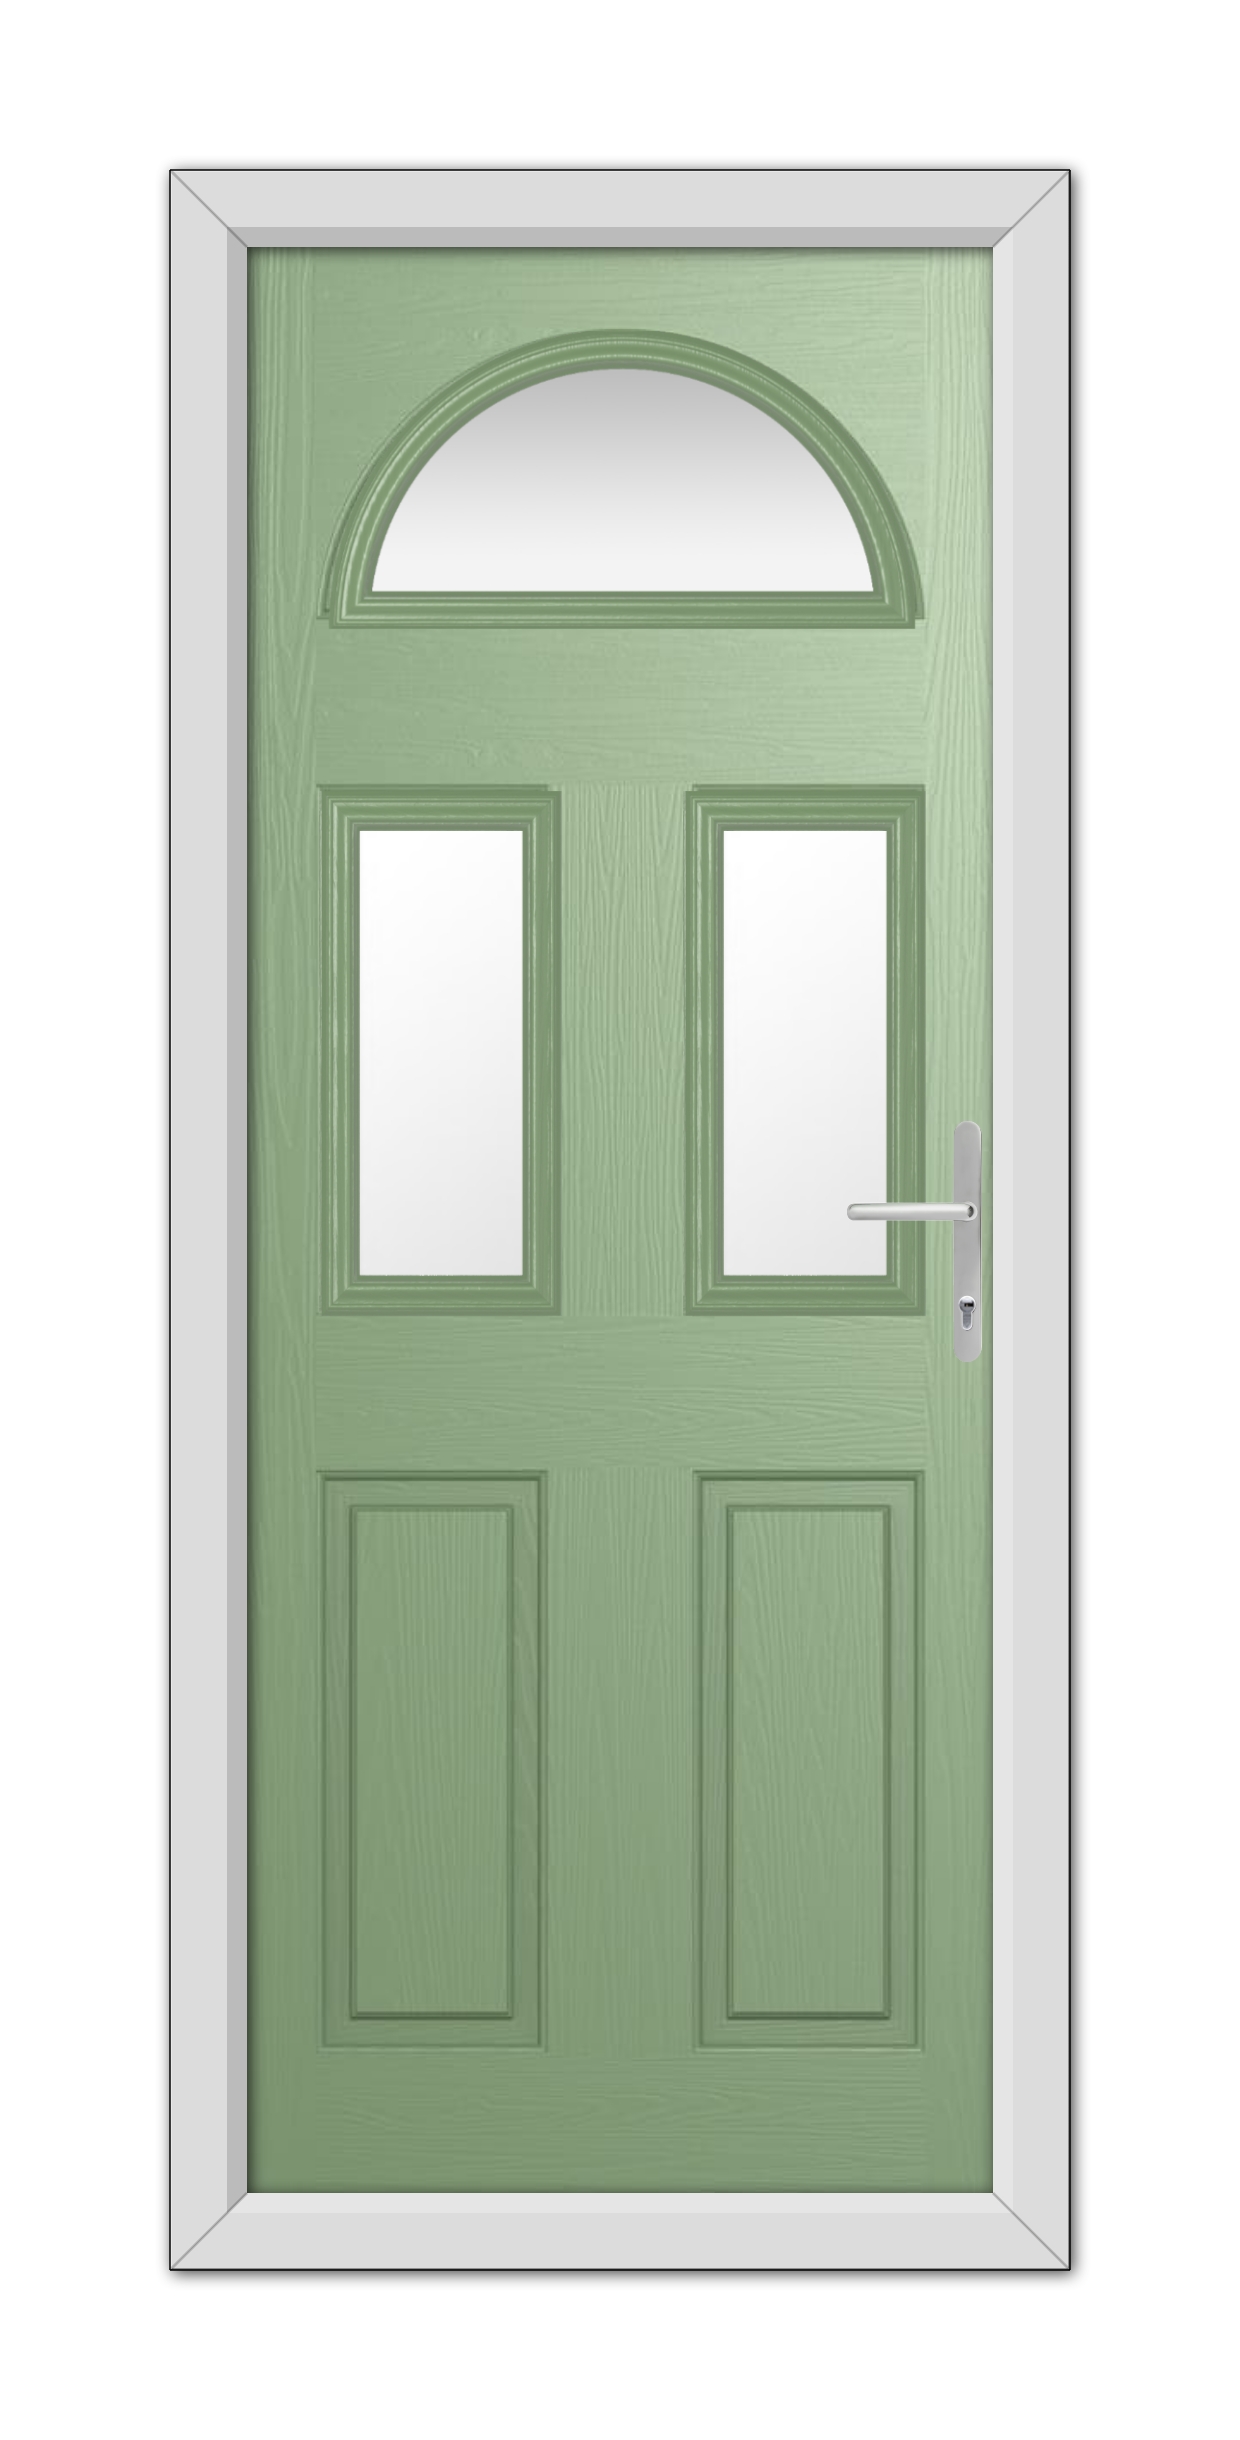 A Chartwell Green Winslow 3 Composite Door 48mm Timber Core with a semicircular transom window above two rectangular panes, framed in white, featuring a modern handle on the right side.